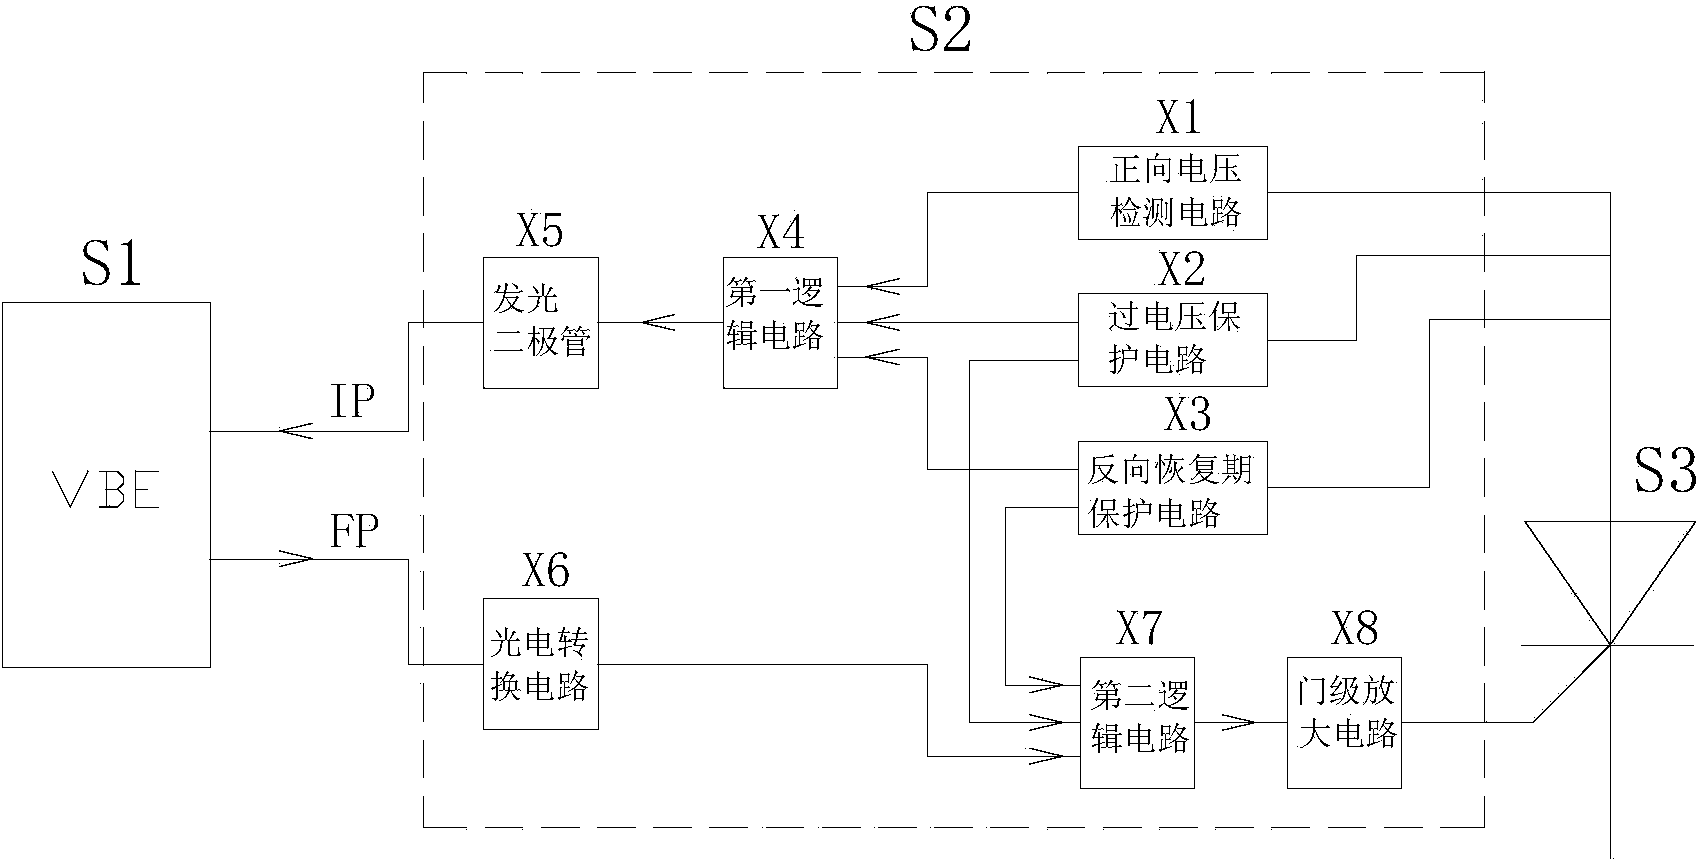 Control and monitor method of silicon controlled rectifier converter valve for extreme high voltage direct current power transmission